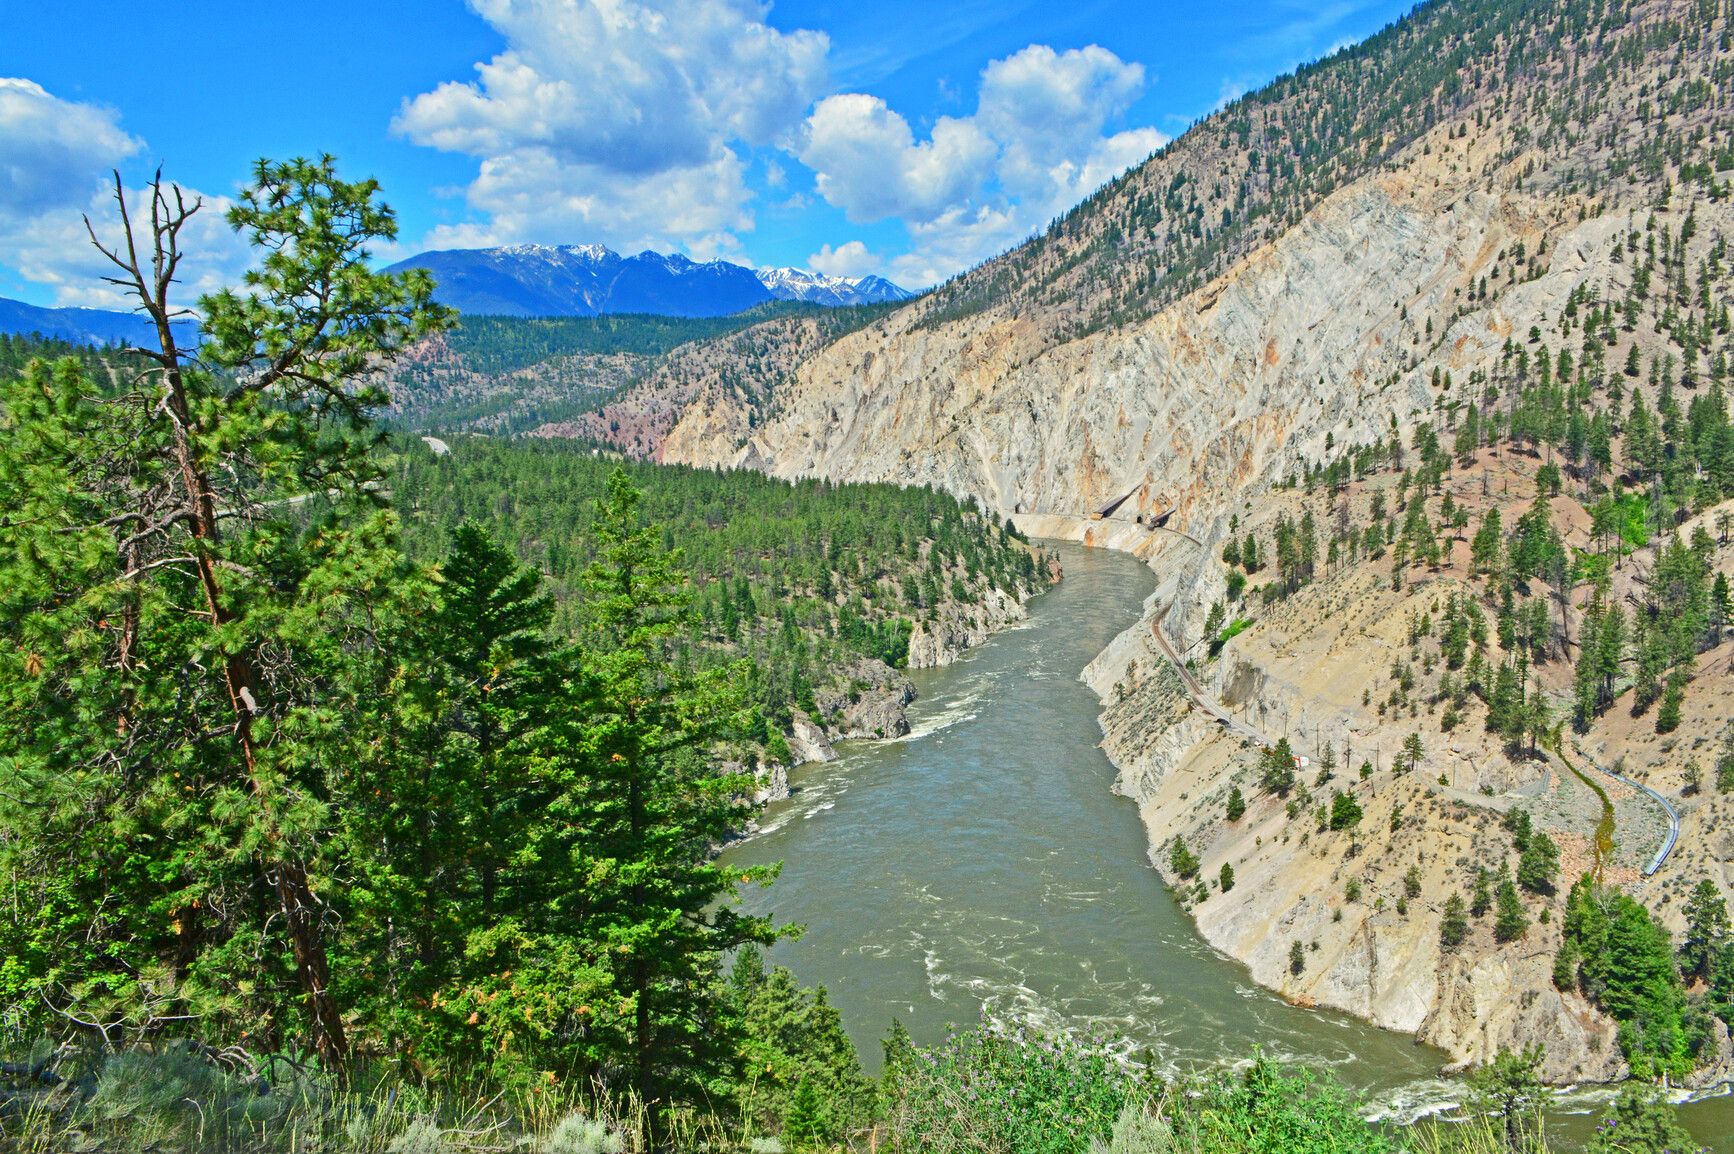 The Thompson River flows through the scenic valley in Skihist Park.